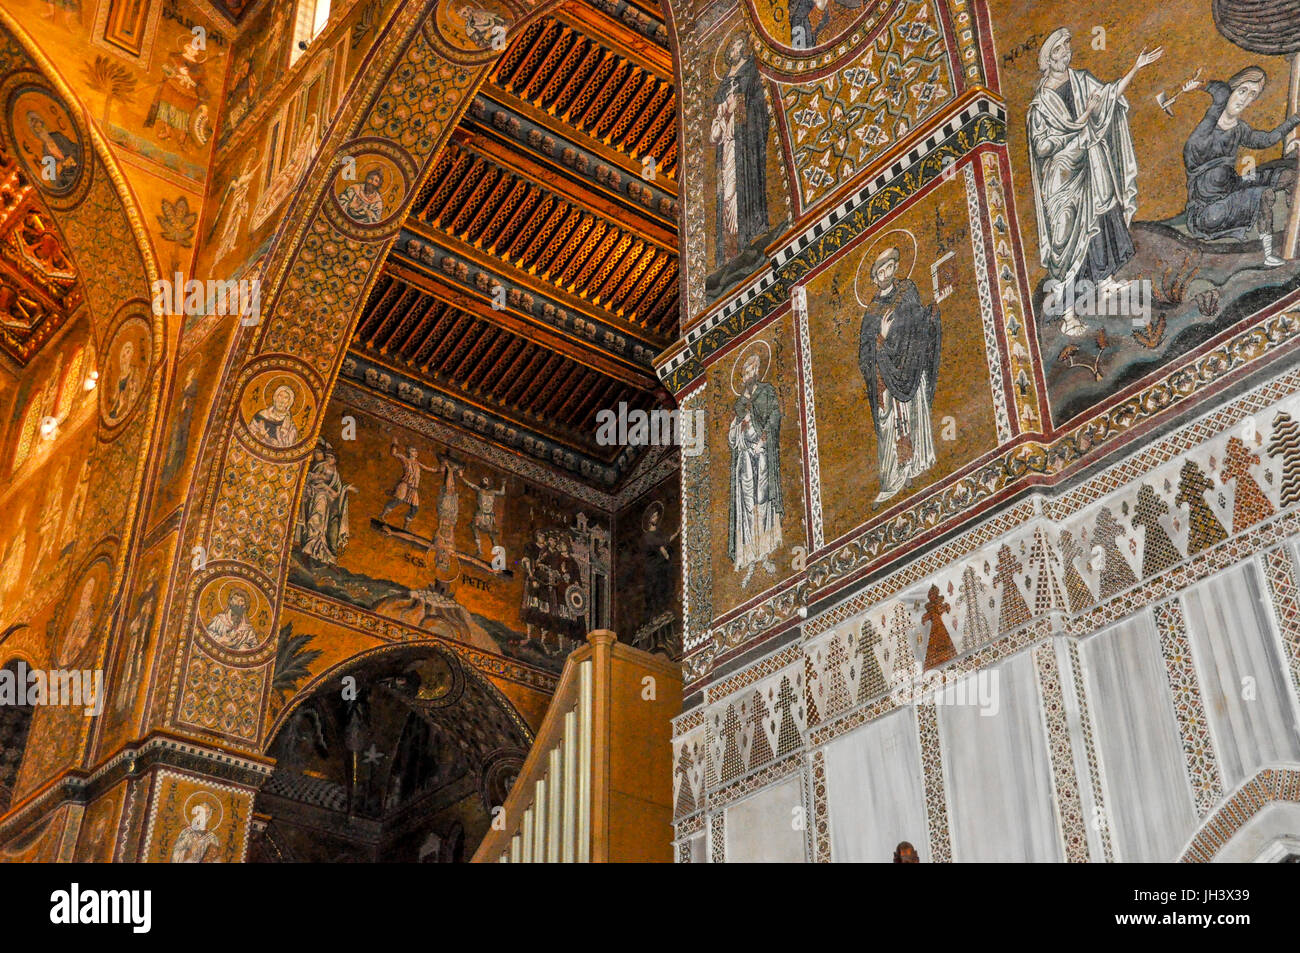 The interior of Monreale Cathedral, adorned with mosaic tiles. Stock Photo